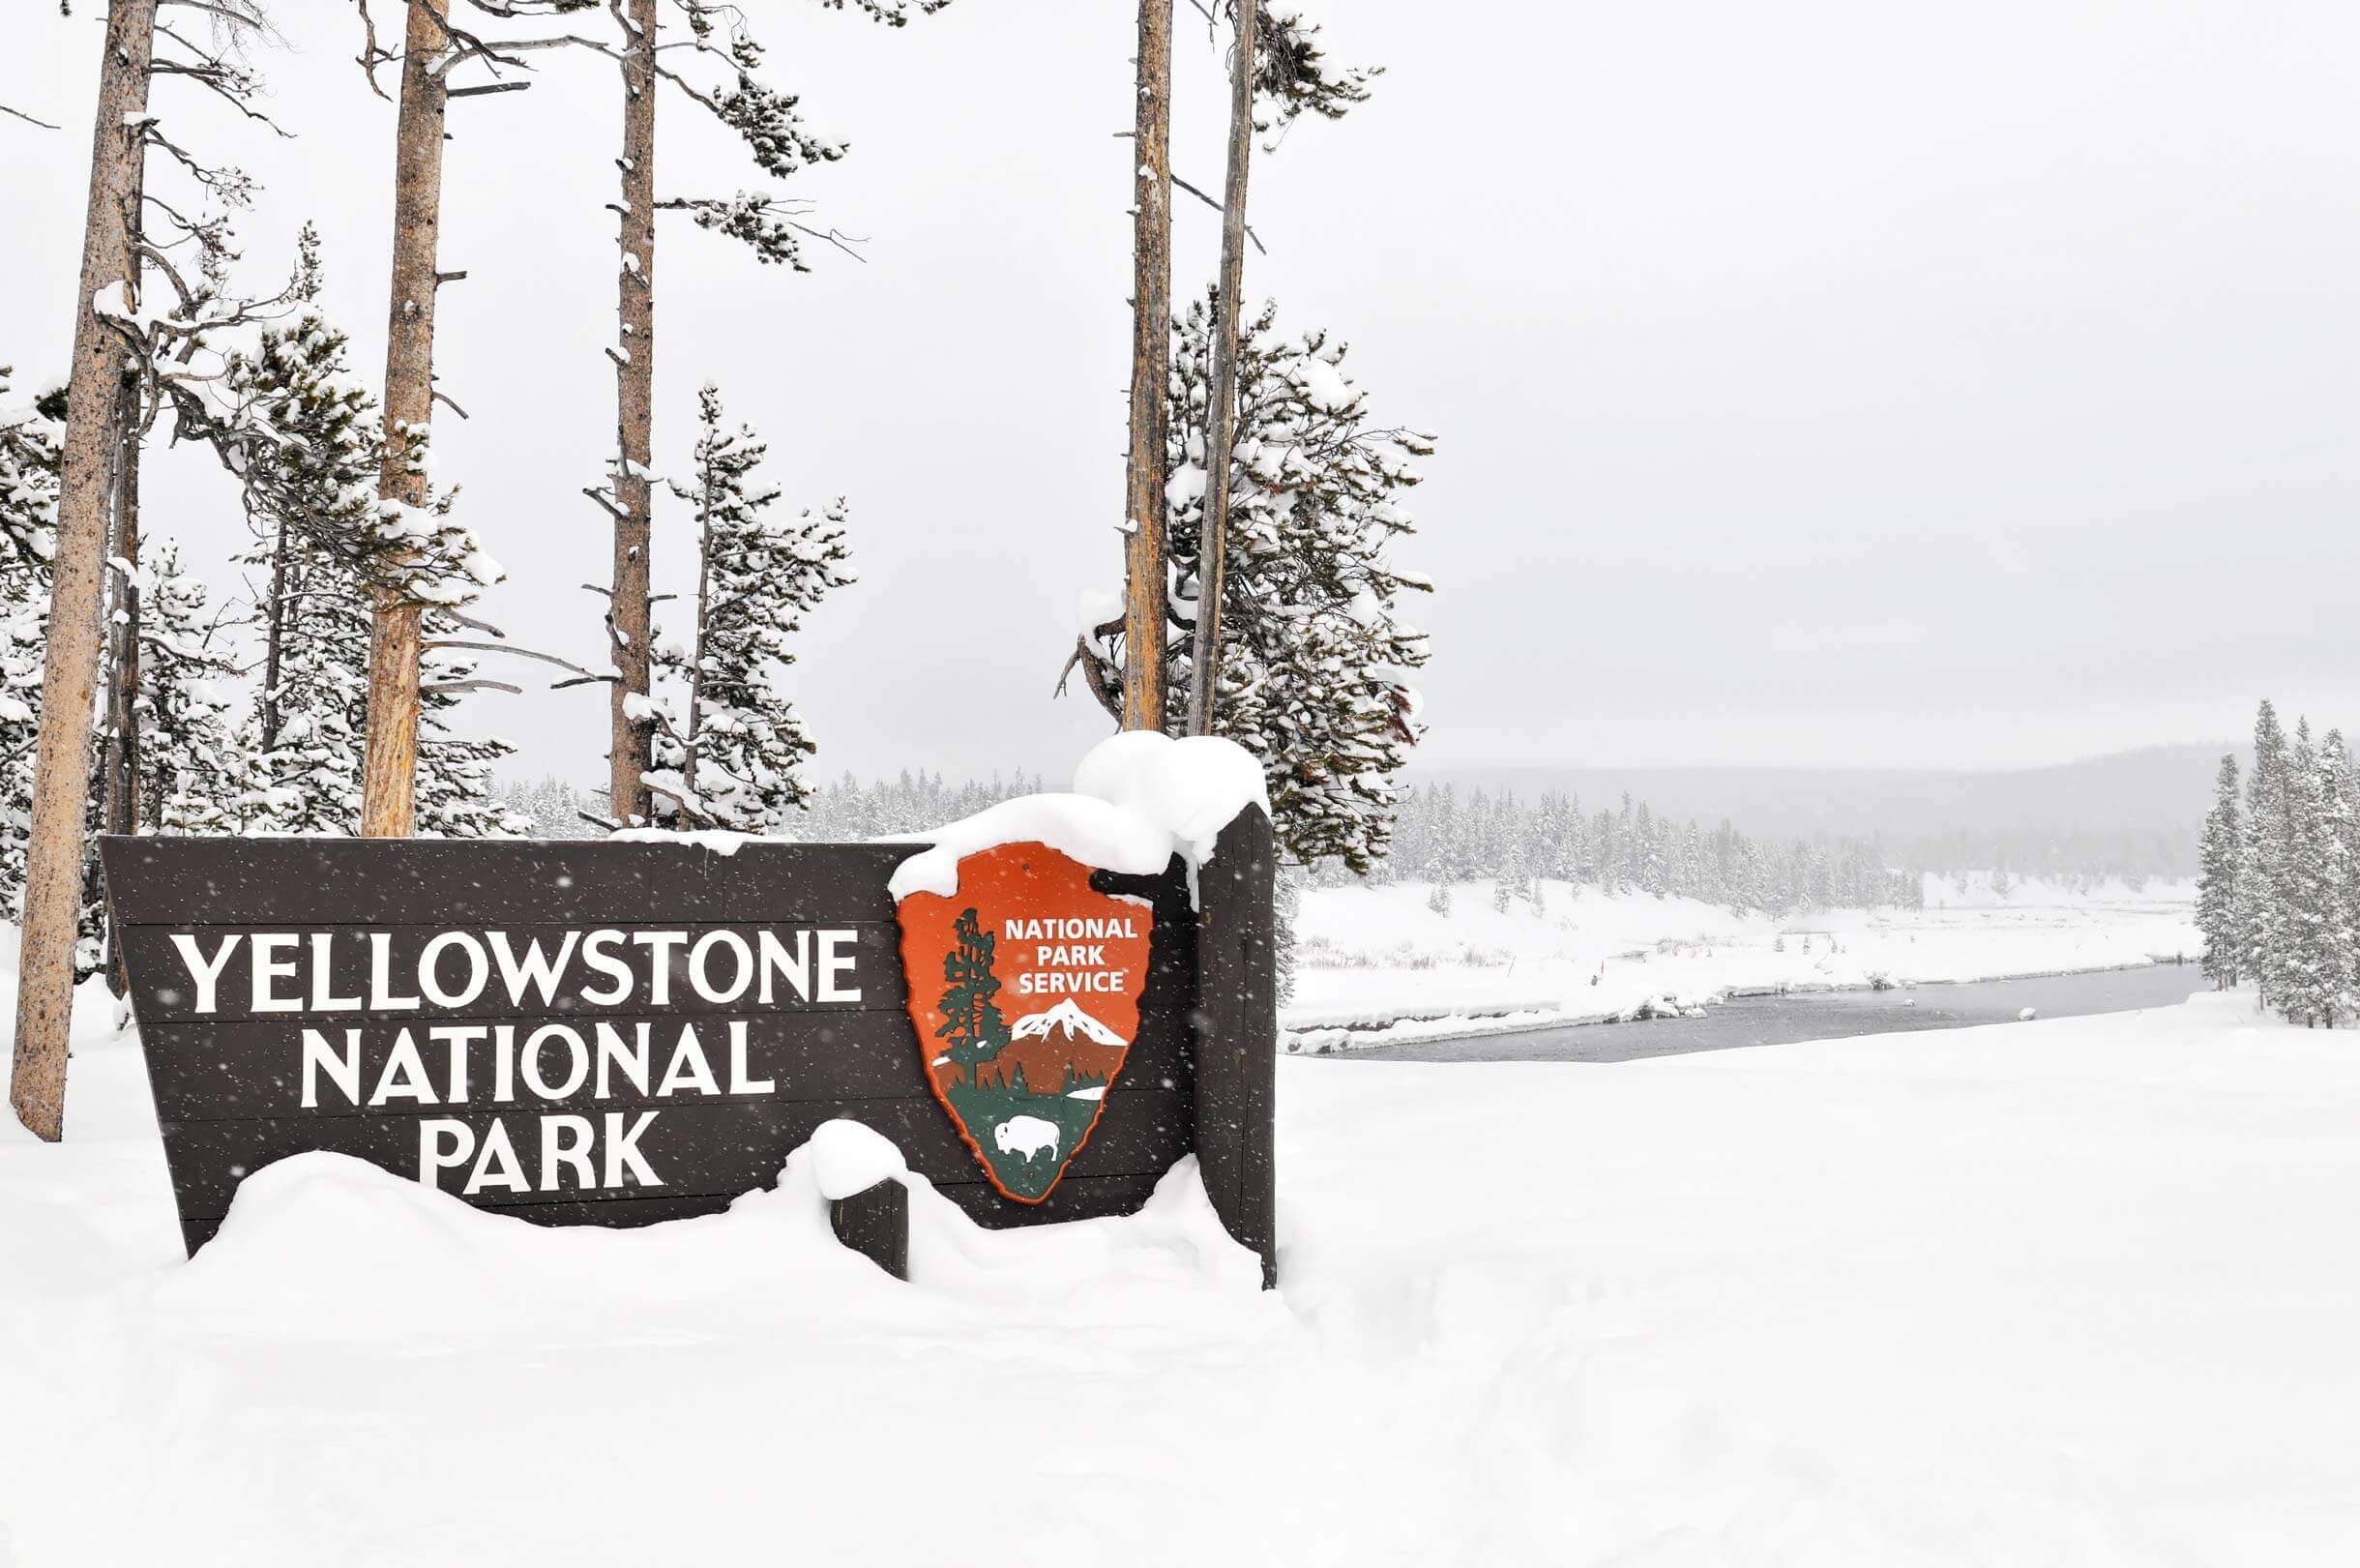 Yellowstone National Park entrance sign in winter